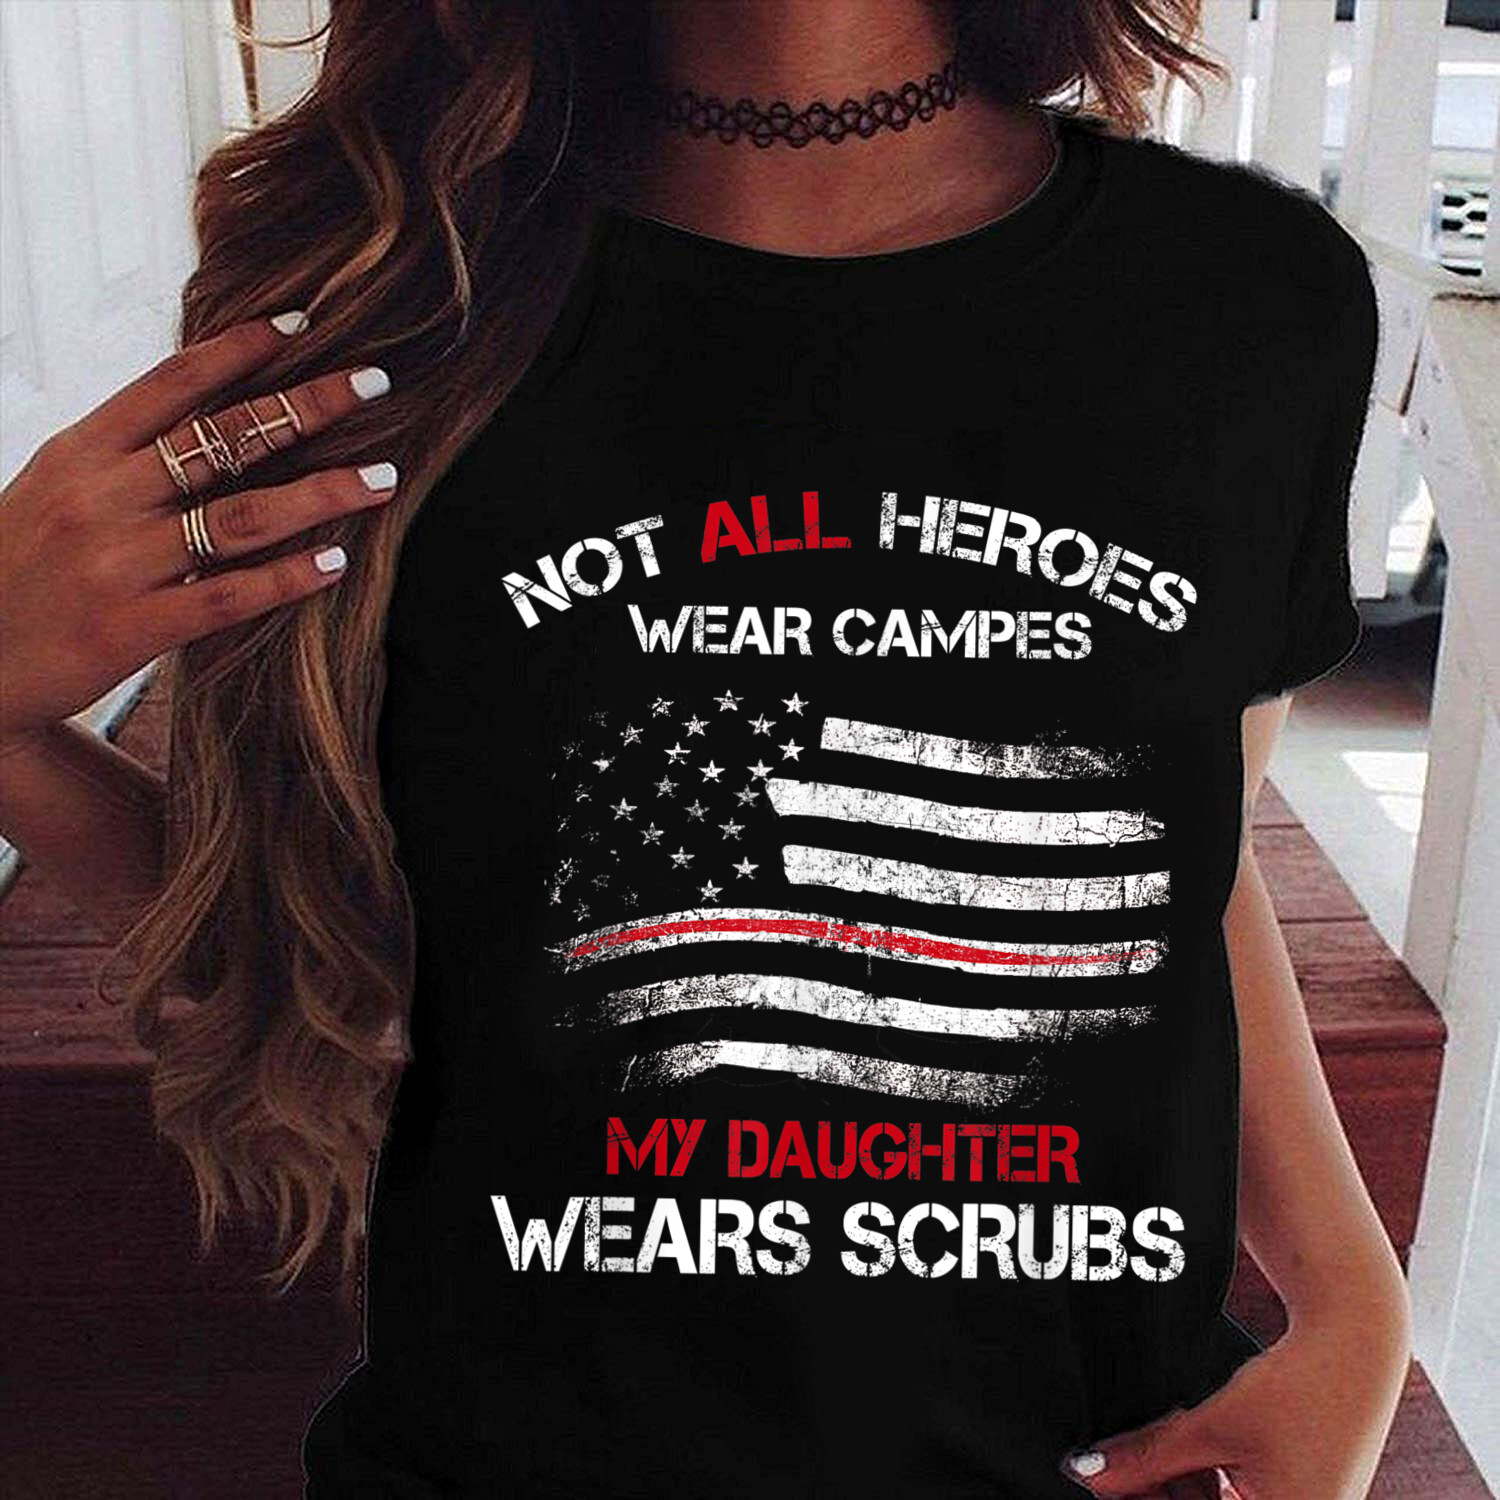 Not All Heroes Wear Capes My Daughter Wears Scrubs T-Shirt